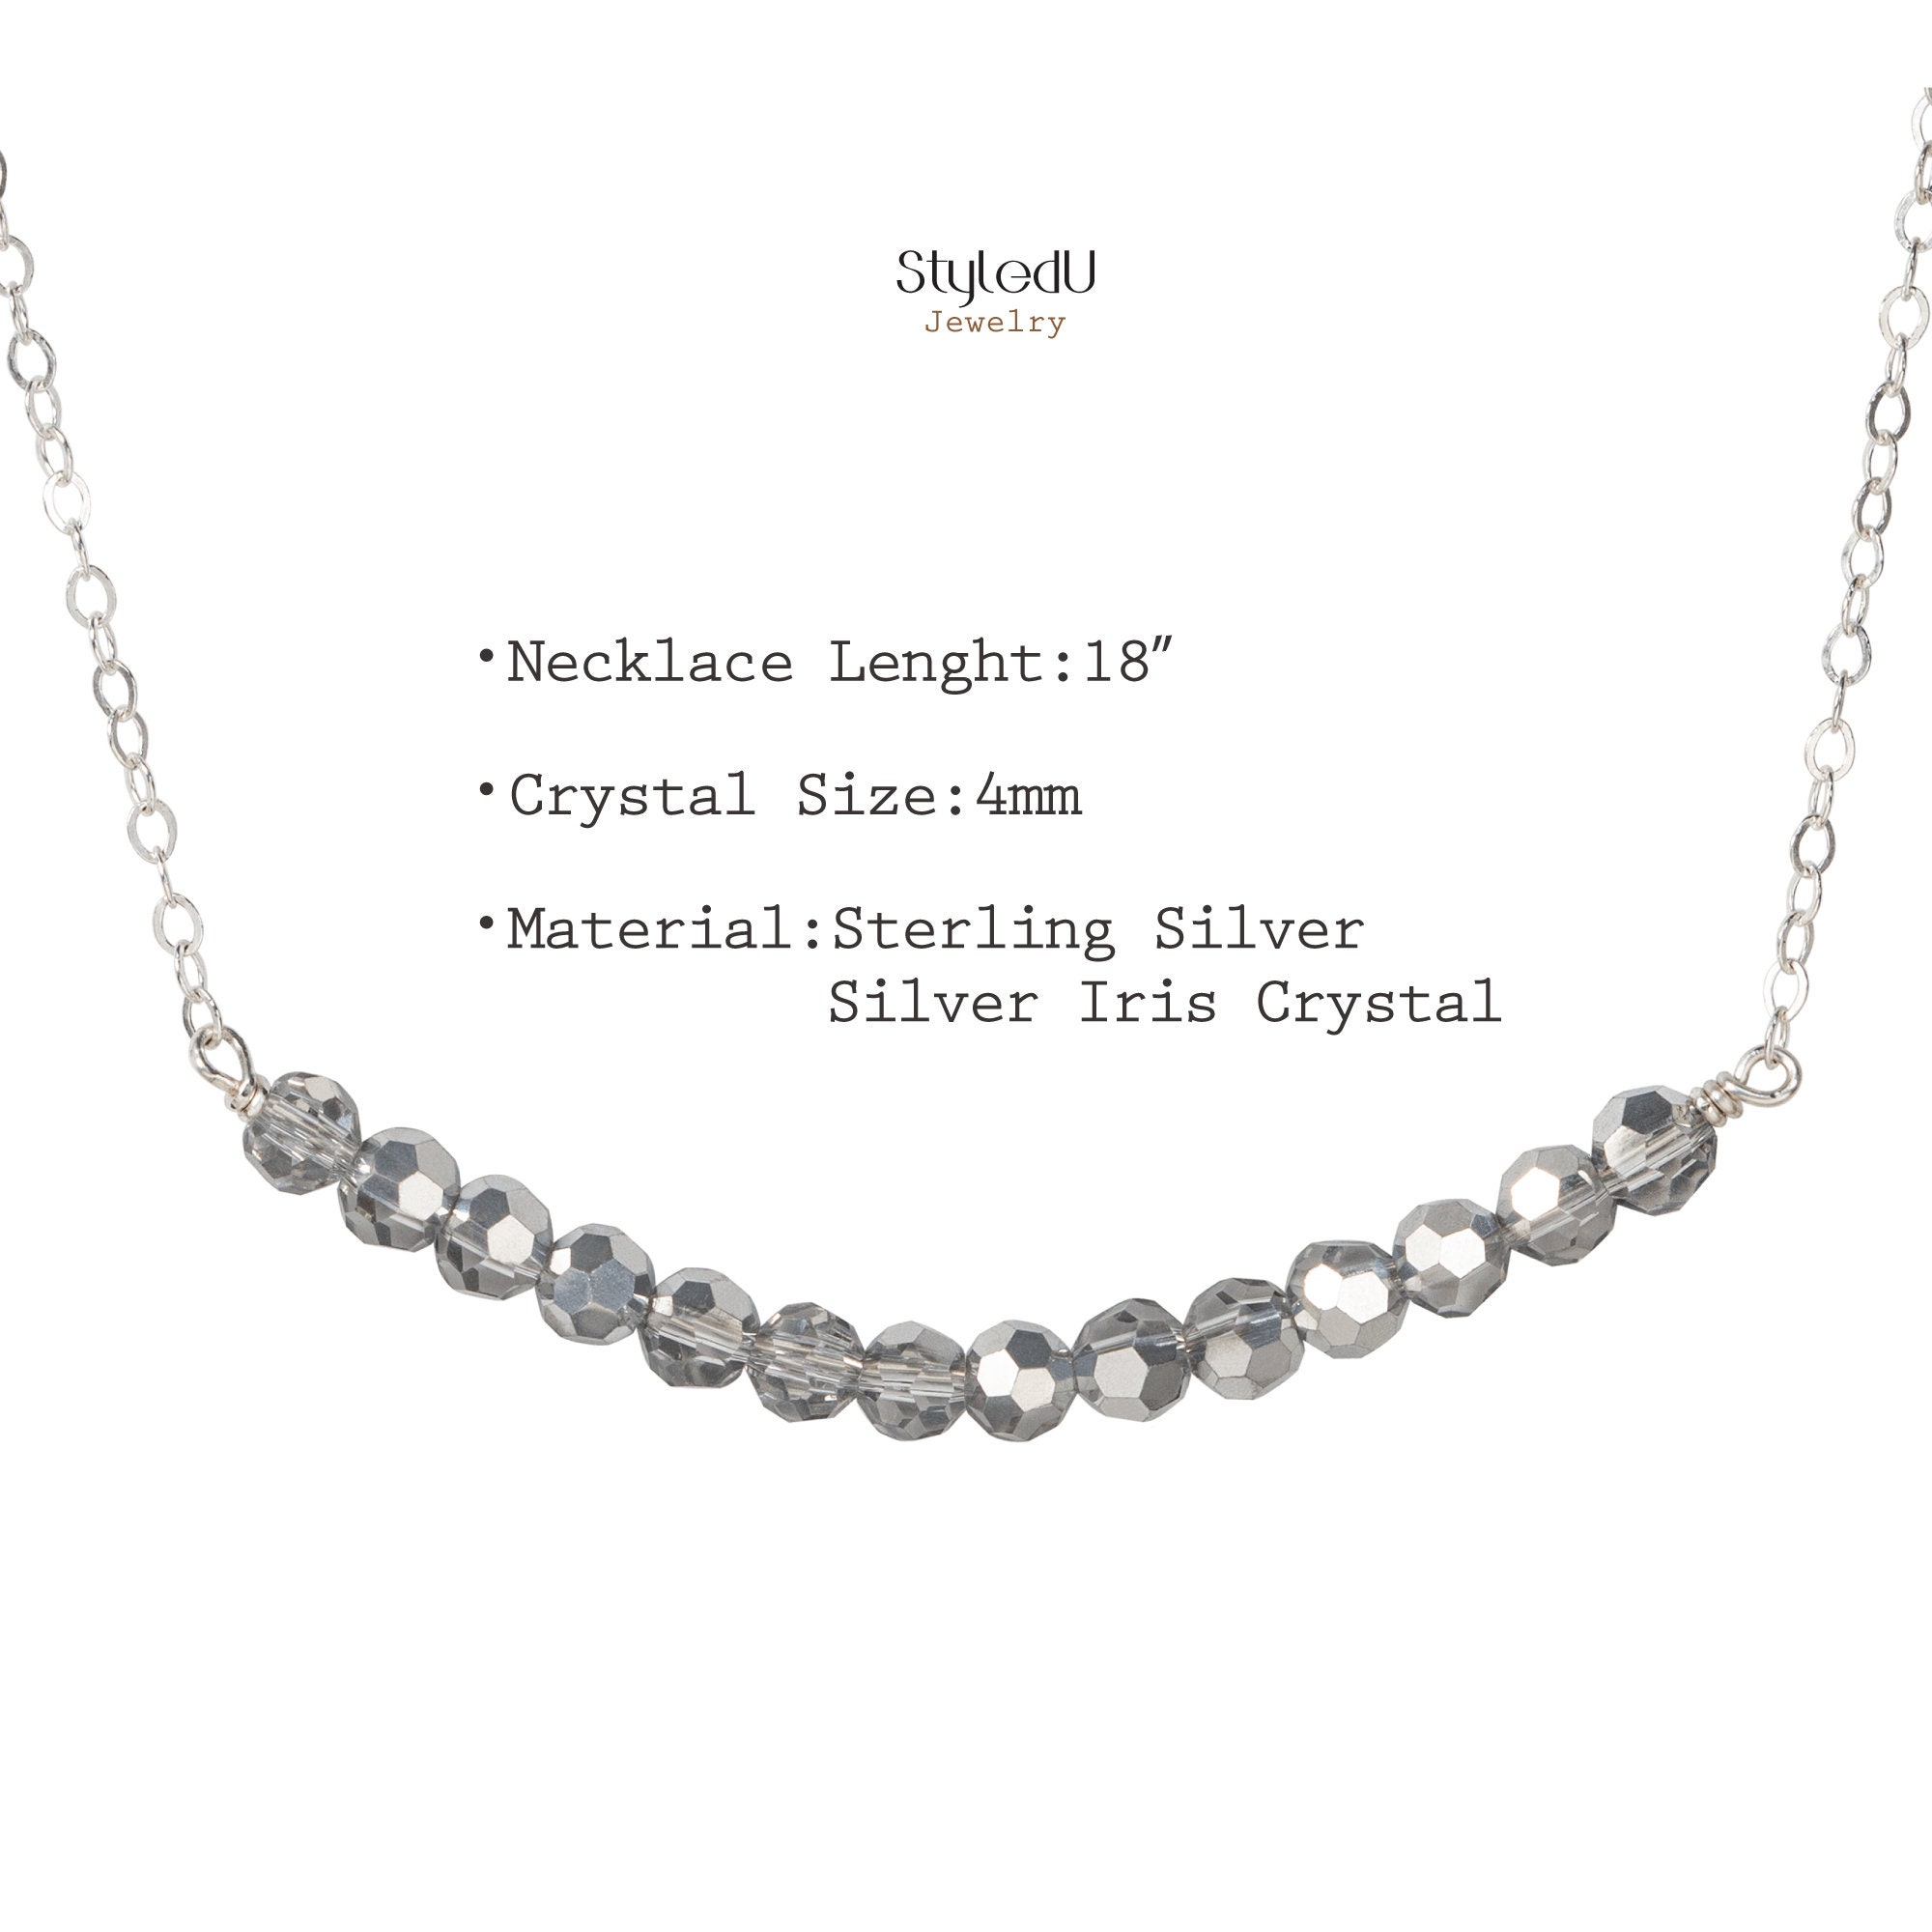 14th Birthday Gifts for Girls, Sterling Silver 14 Crystal Beads Necklace Gift for 14 Year Old Girl, Birthday Milestone Necklace